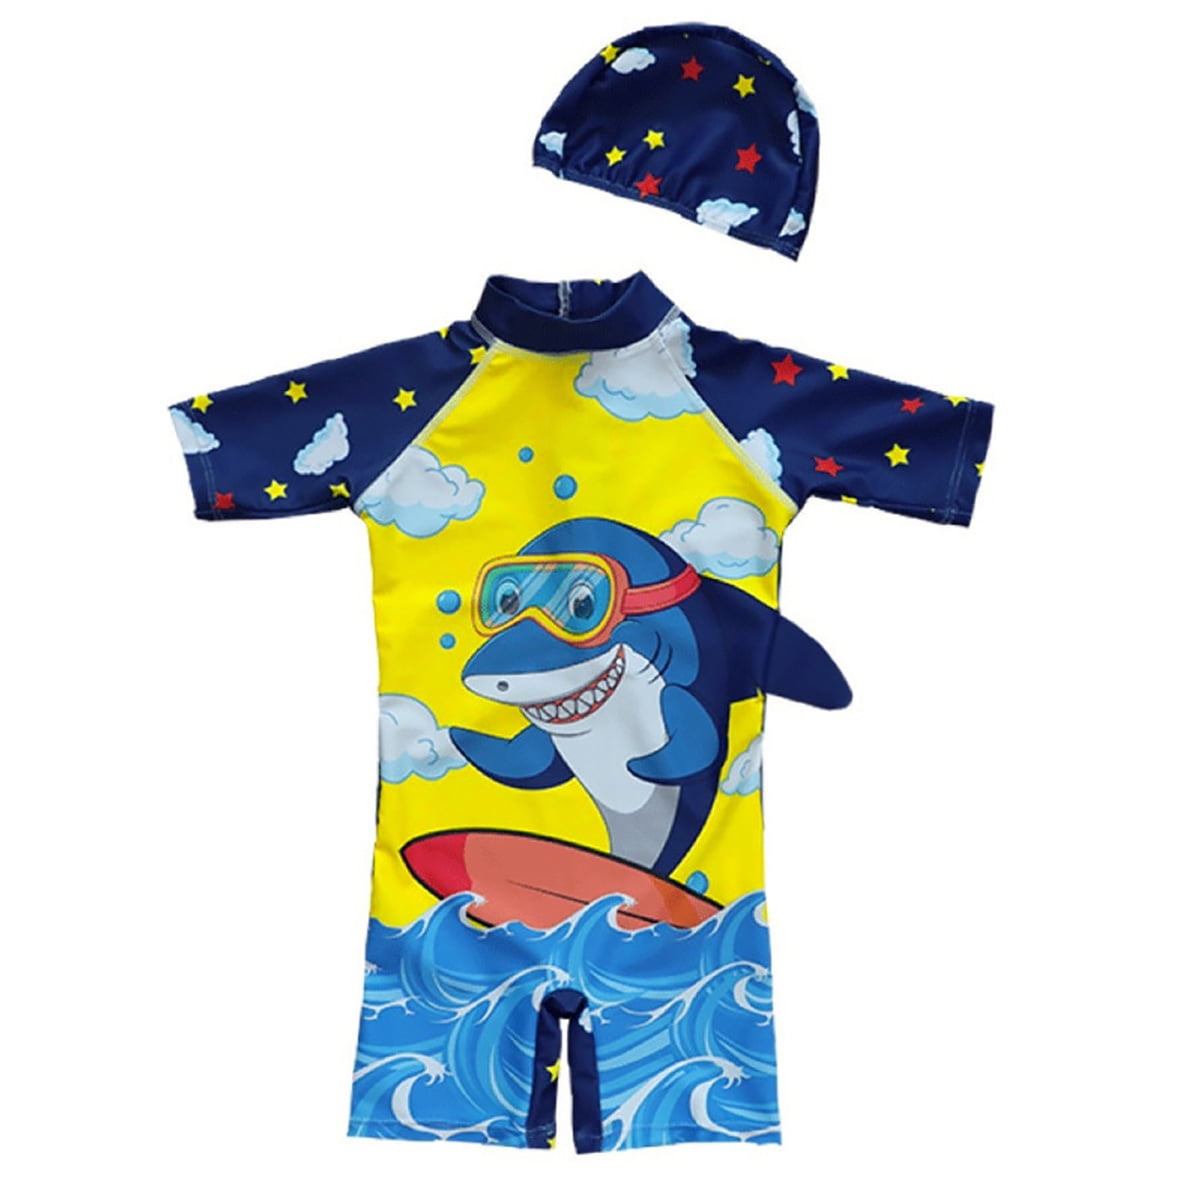 Boys Two Piece Shark Swimsuits Rash Guard Short Sleeve Bathing Suit Swimwear Sets with Hat UPF 50 for Kids